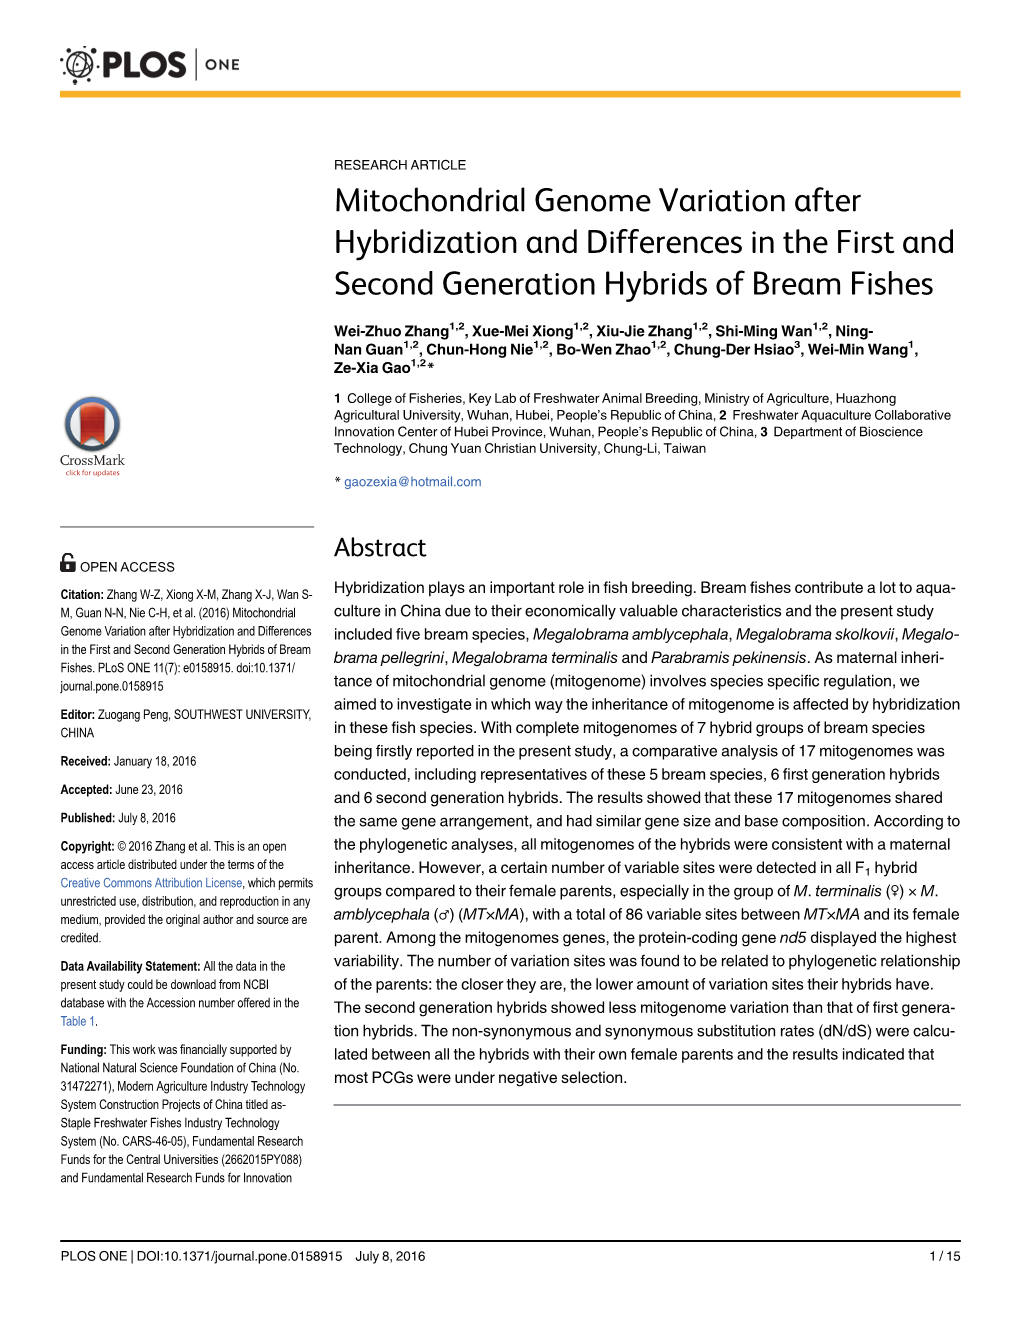 Mitochondrial Genome Variation After Hybridization and Differences in the First and Second Generation Hybrids of Bream Fishes